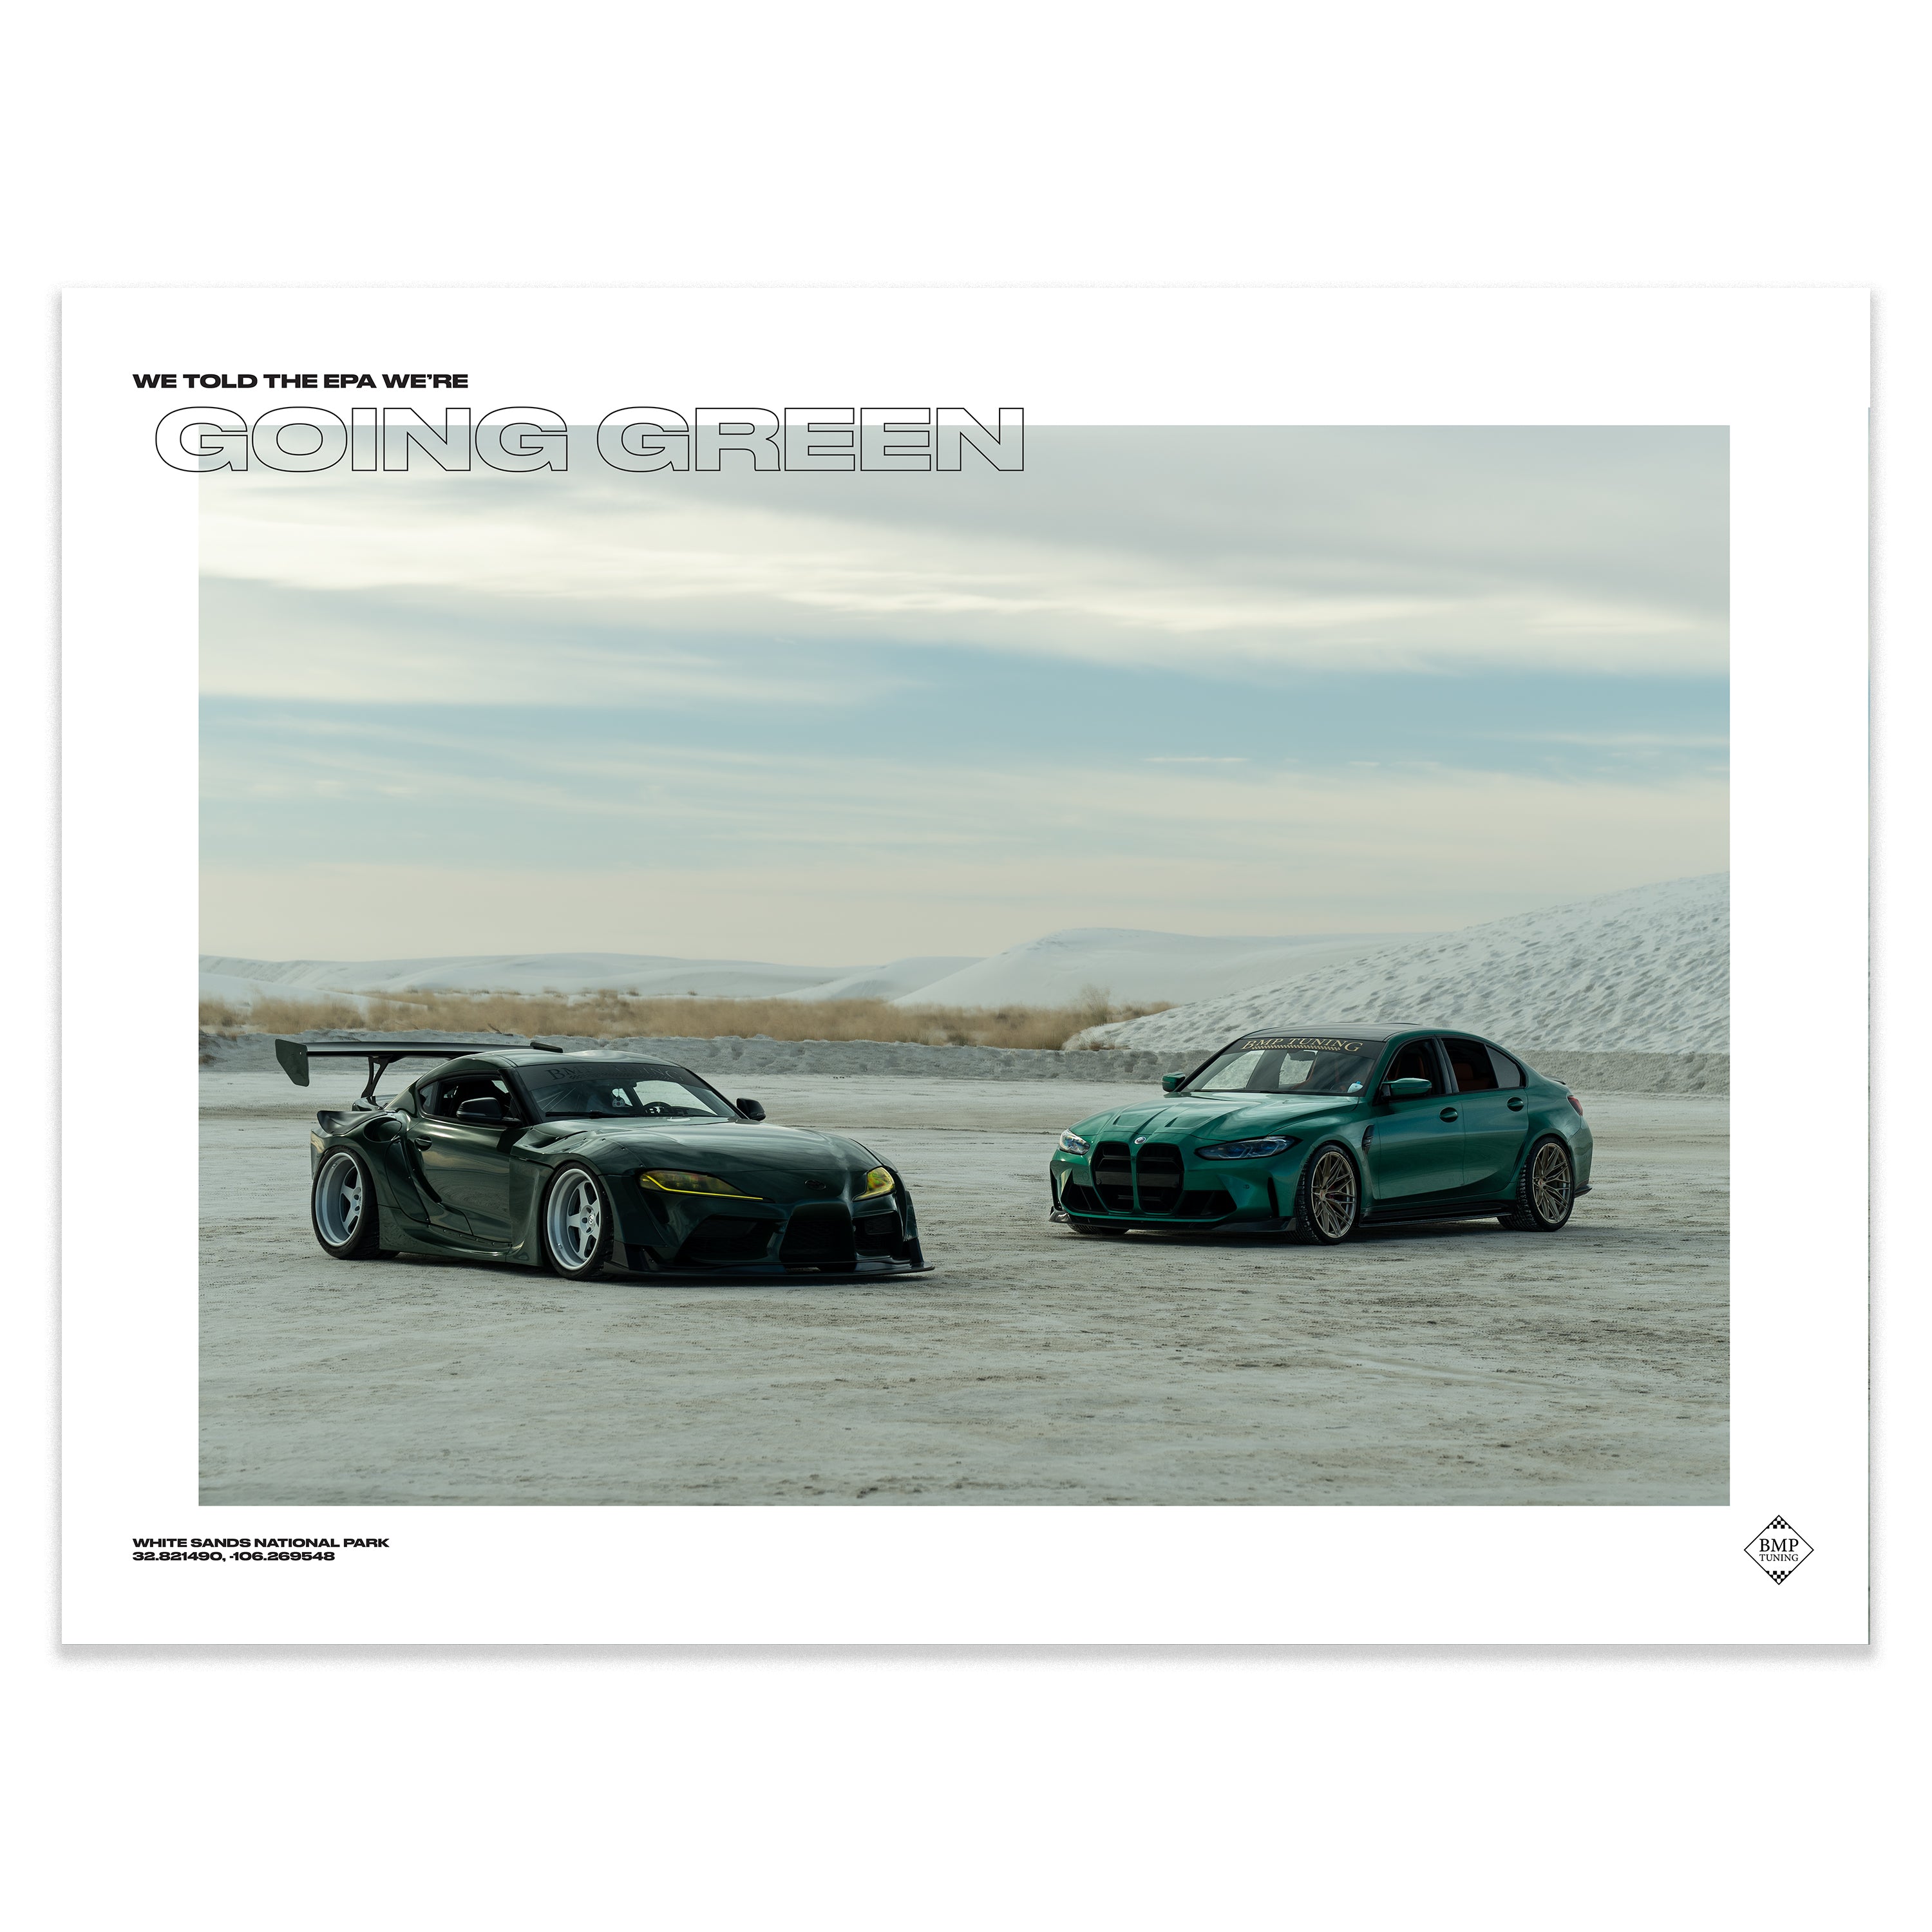 BMP Tuning G80 M3 and A90 Supra Poster Bundle (18"x24")